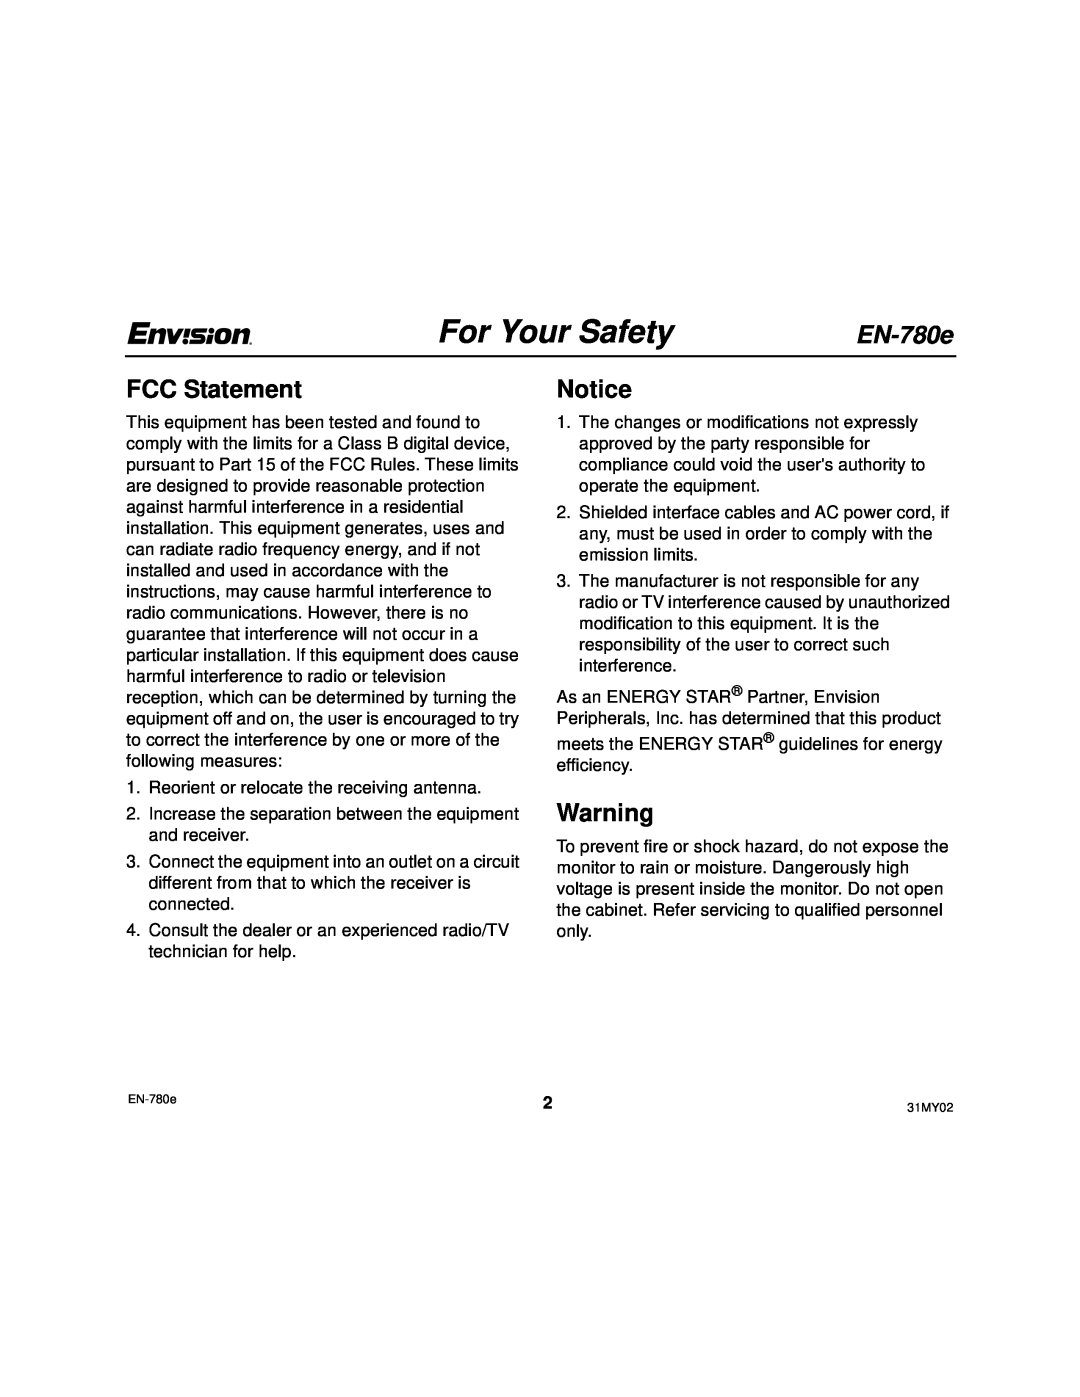 Envision Peripherals EN-780e_31MY02, EN-780e 17 user manual For Your Safety, FCC Statement 